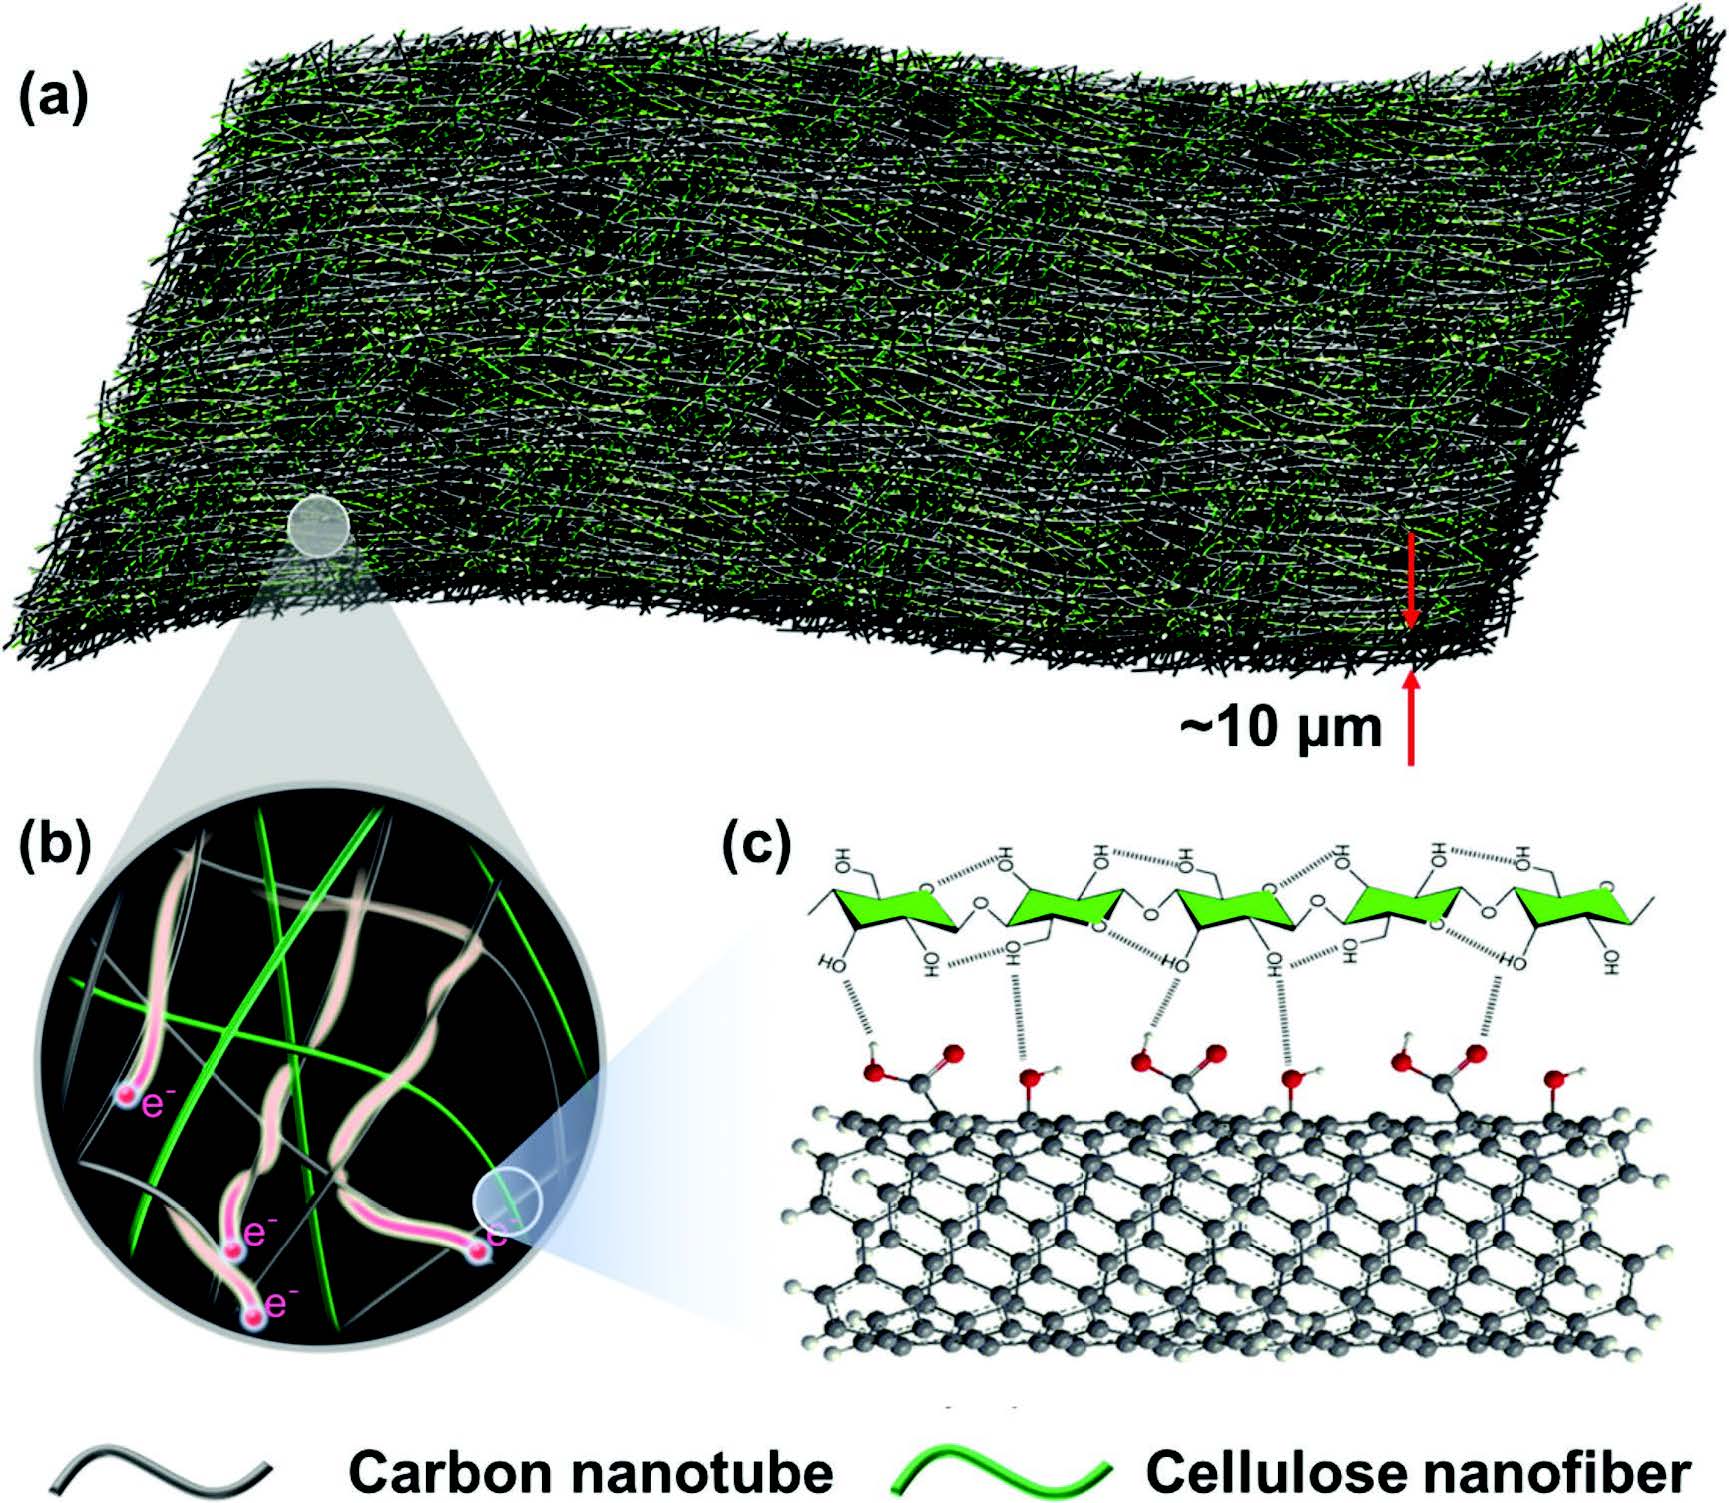 a) Schematic illustrations of the carbon nanotube (CNT)–cellulose nanofiber (CNF), all-fiber based current collectors, where b) CNT provides current pathway and CNF acts as backbone to enable the strength. c) Association exists between CNF and CNT, which enables the stability of CNT in CNF aqueous dispersion and the promising mechanical strength of CNT–CNF film.